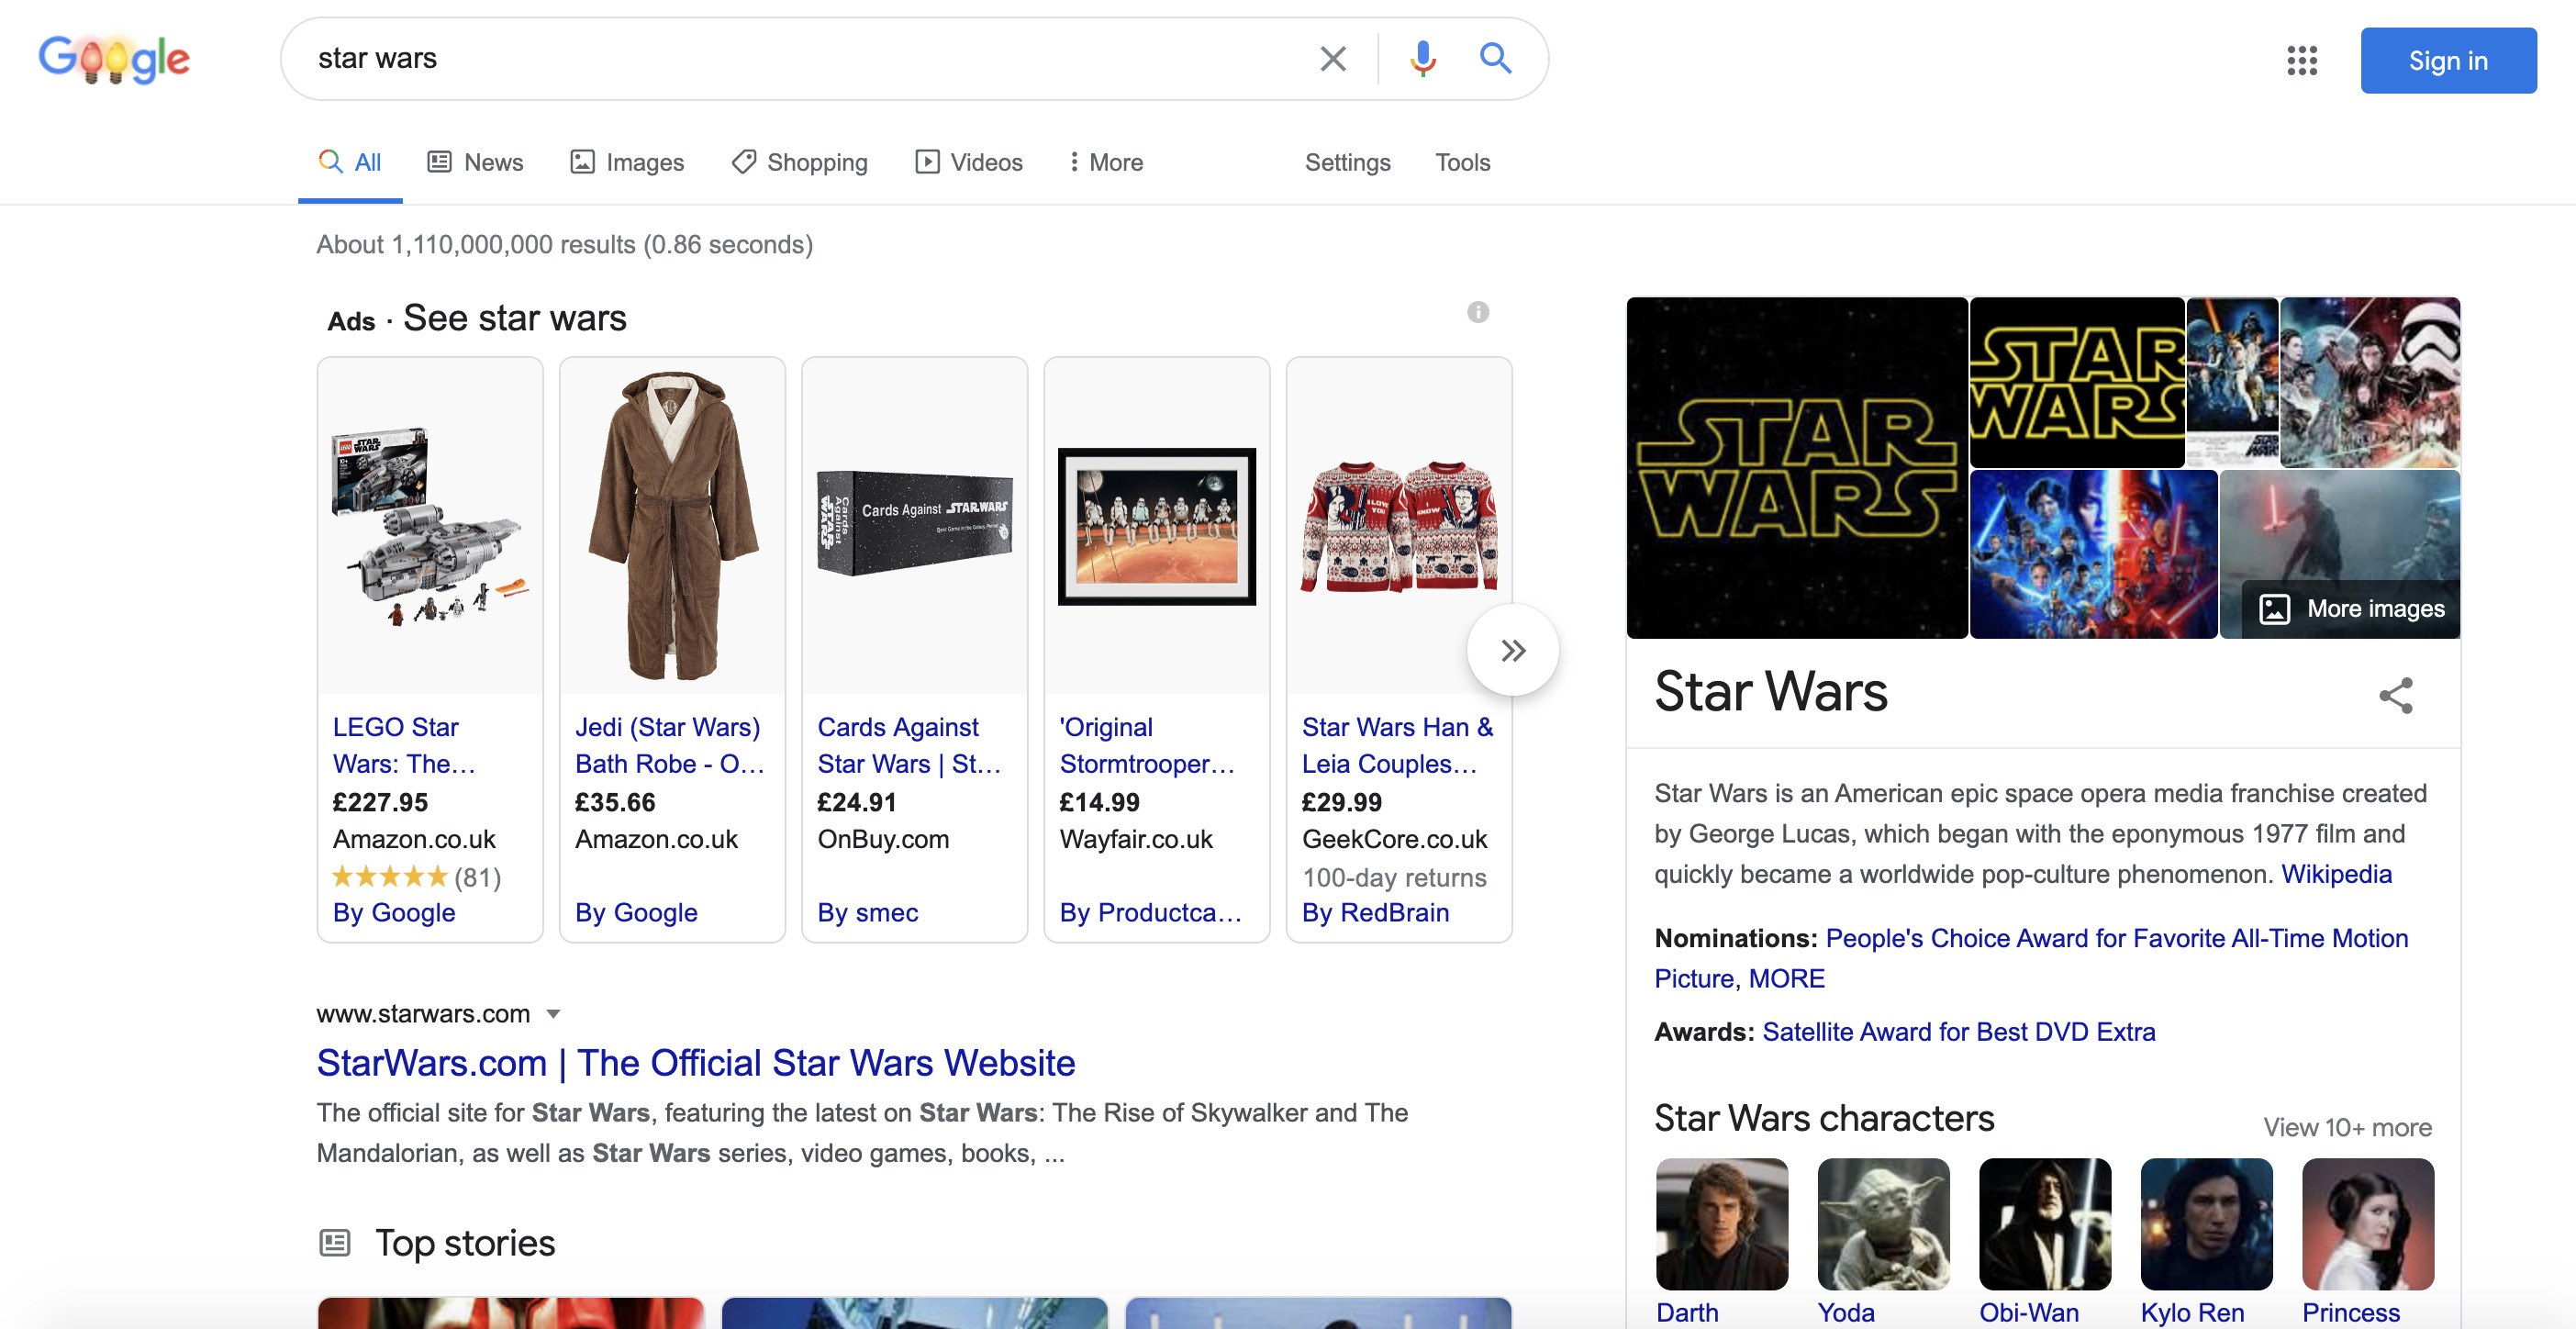 structured data shown in search results